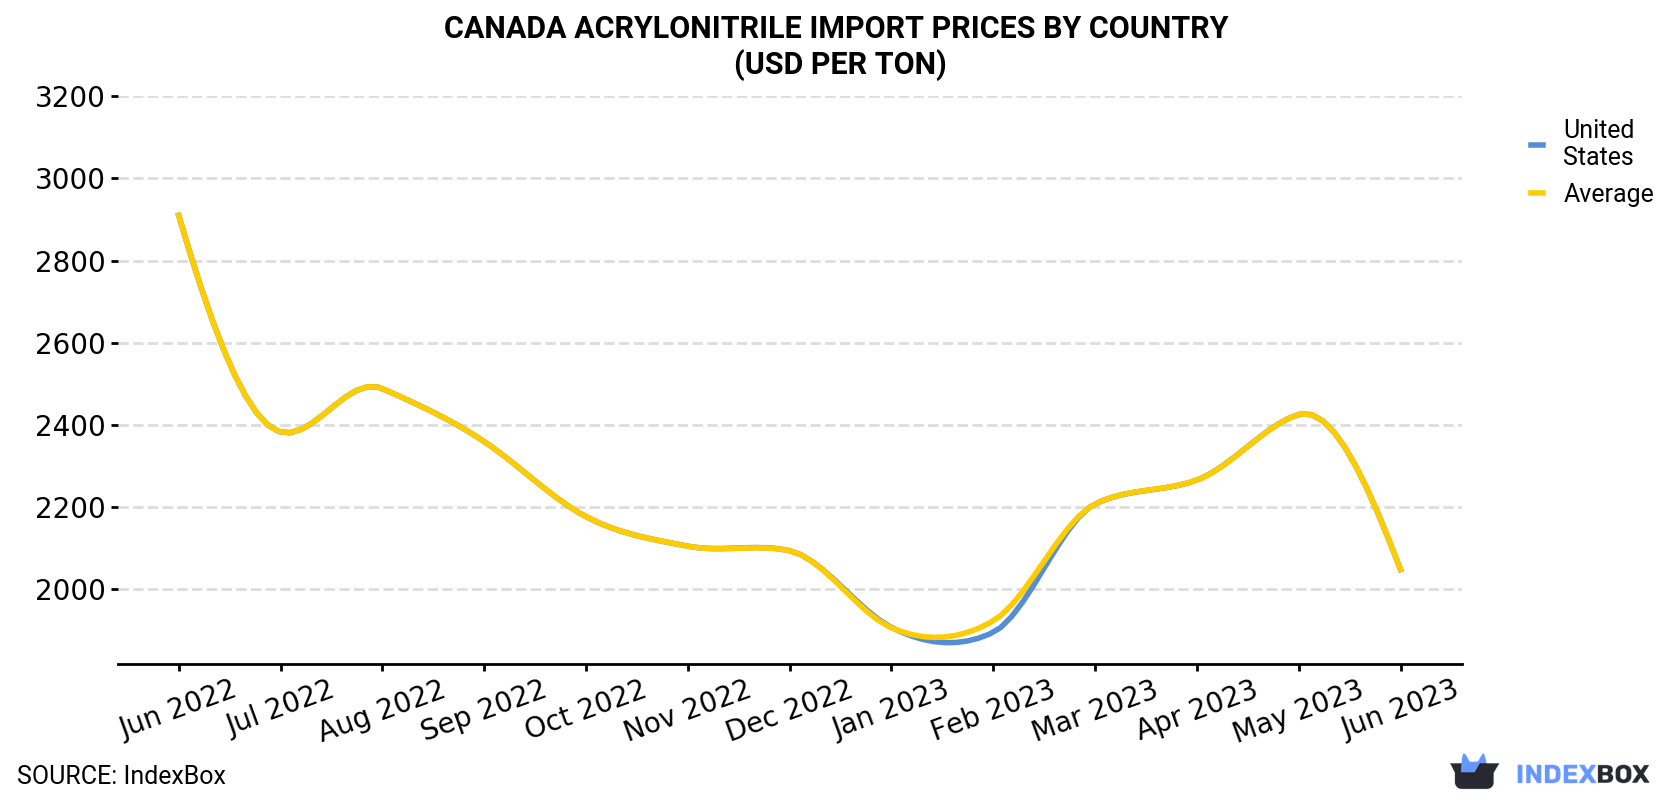 Canada Acrylonitrile Import Prices By Country (USD Per Ton)